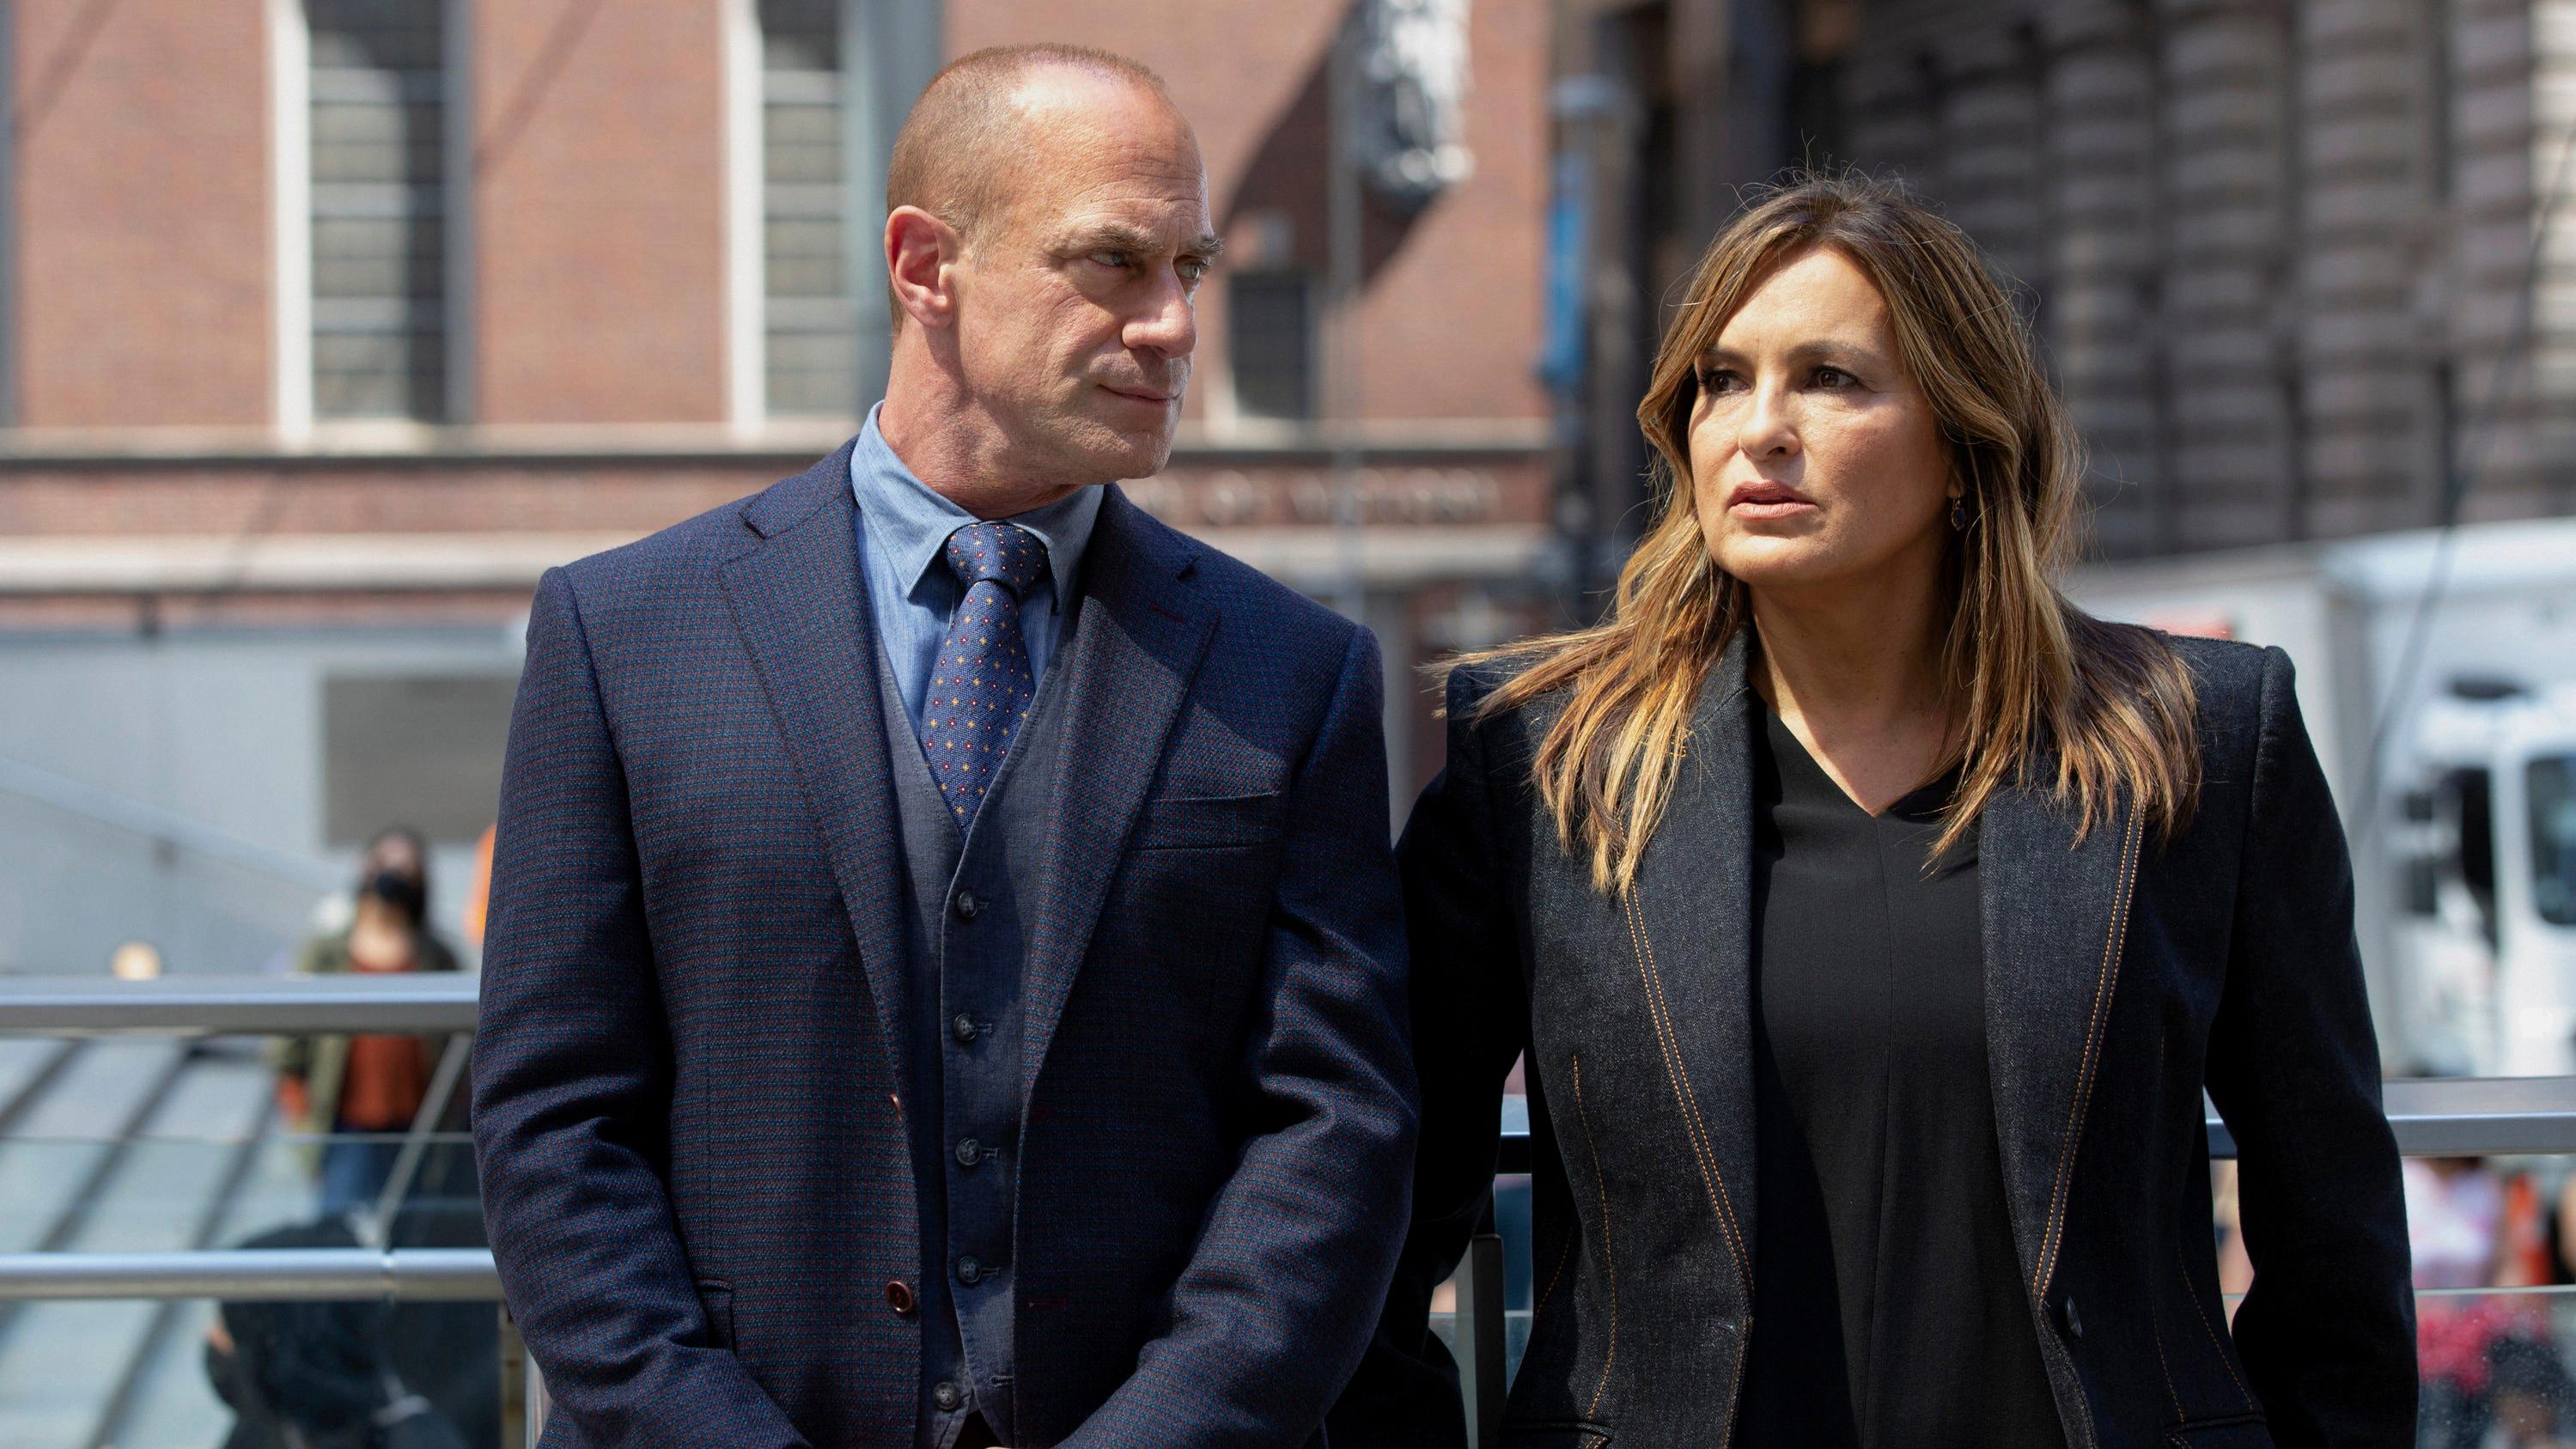 did stabler and benson have an affair